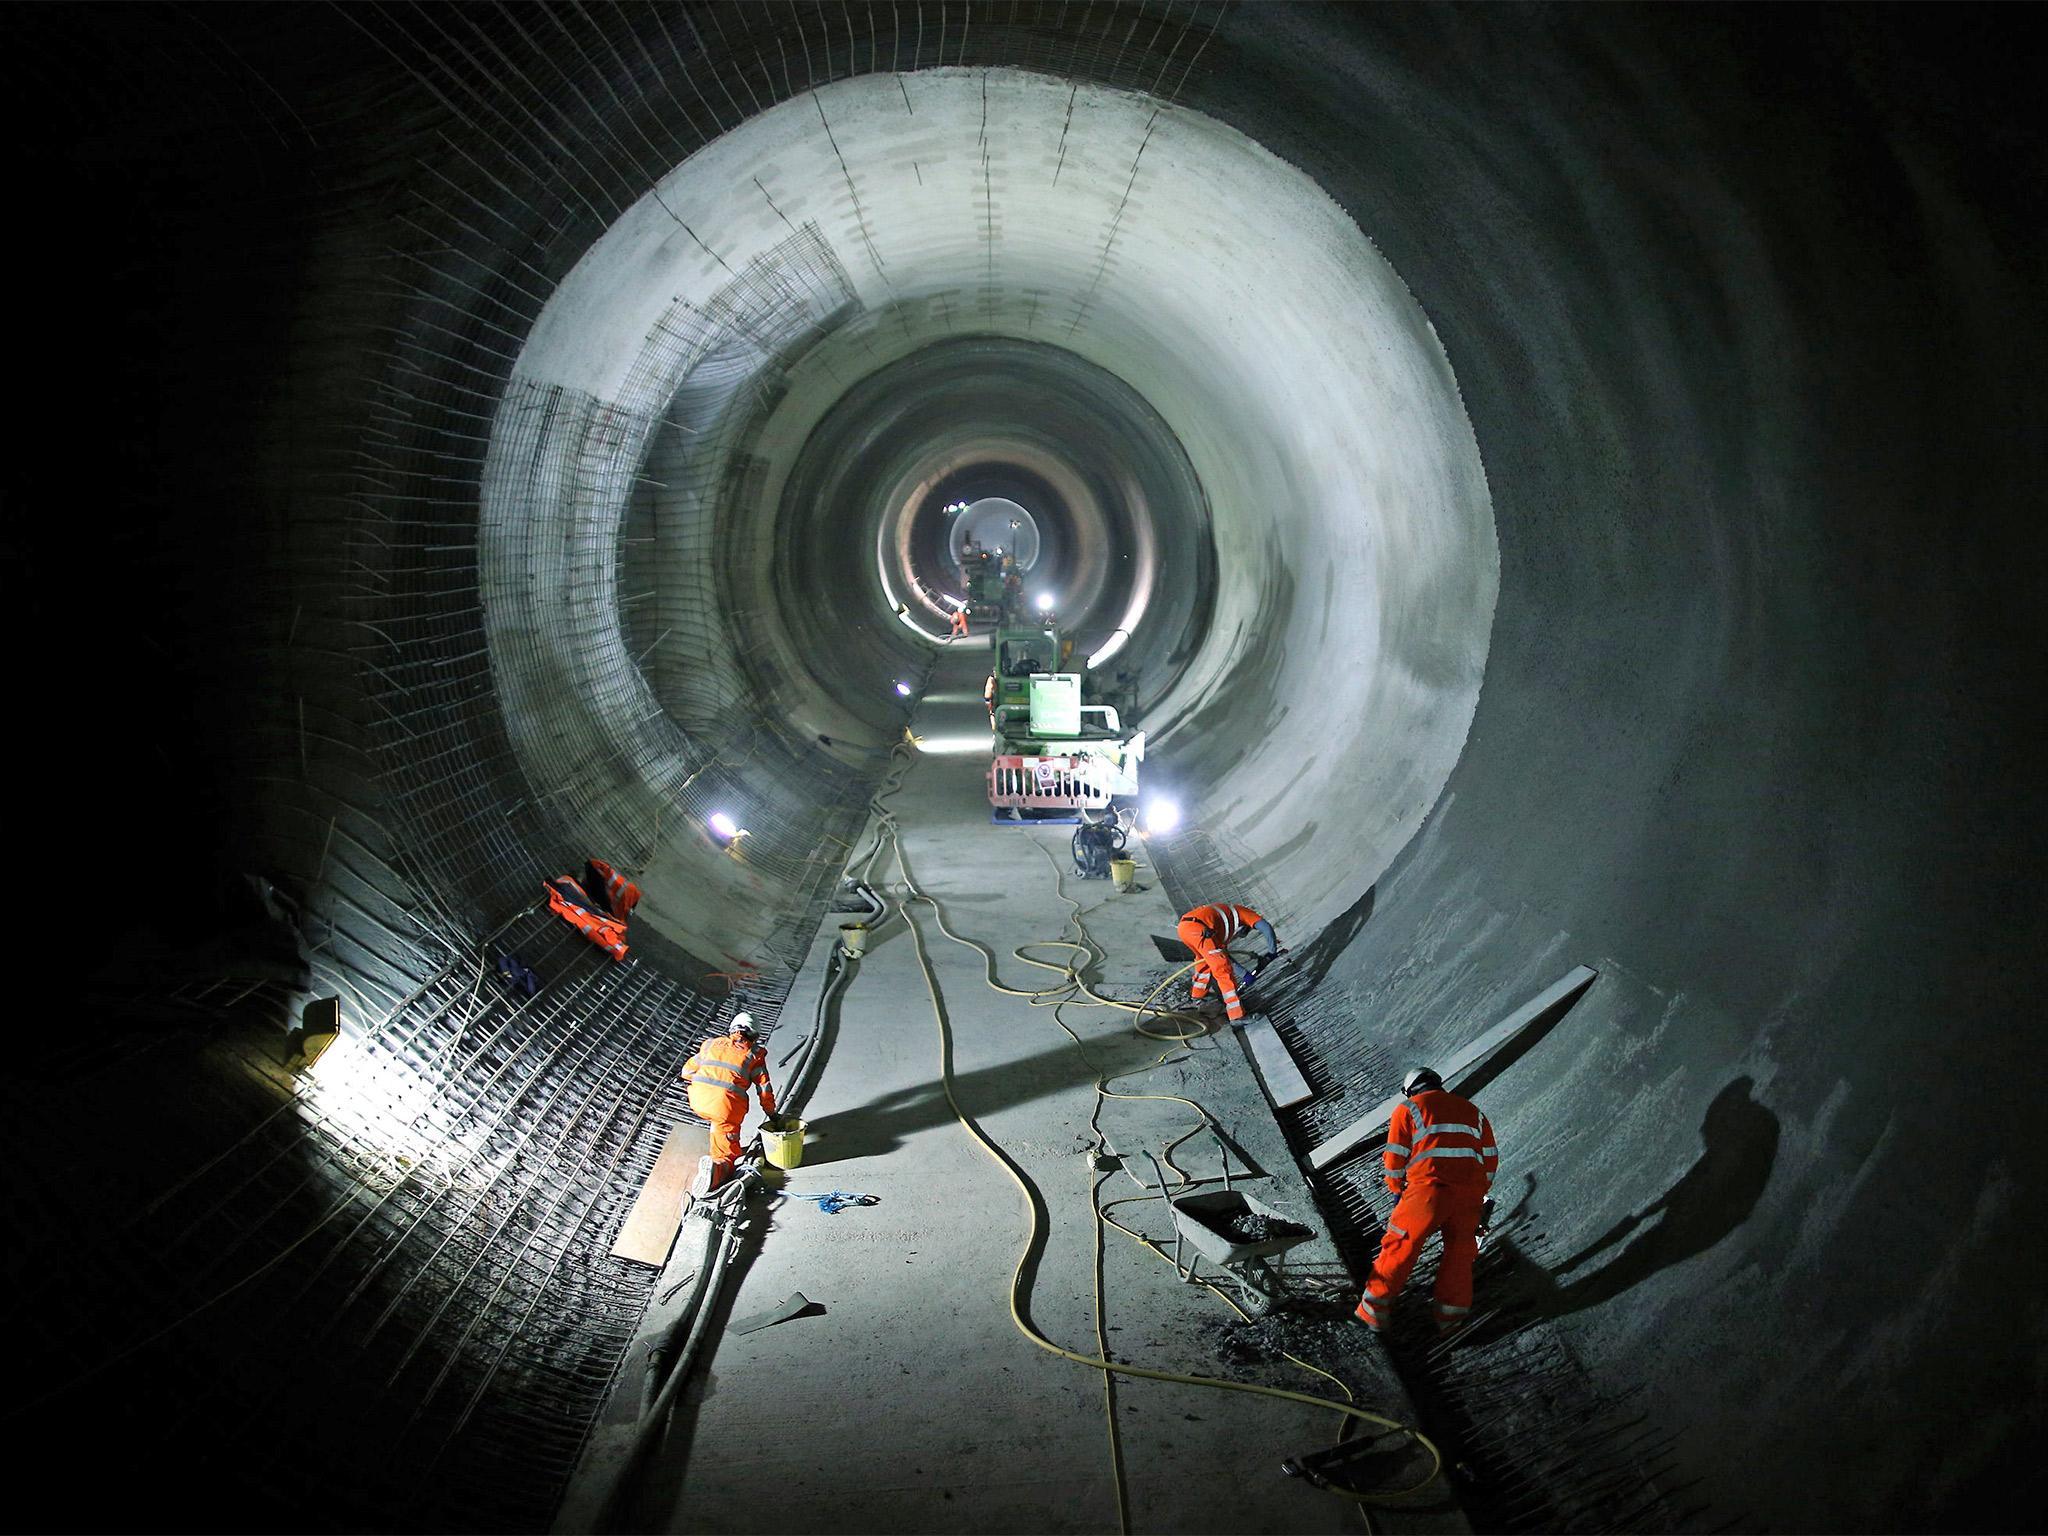 The future is orange: Crossrail is Europe's biggest infrastructure project